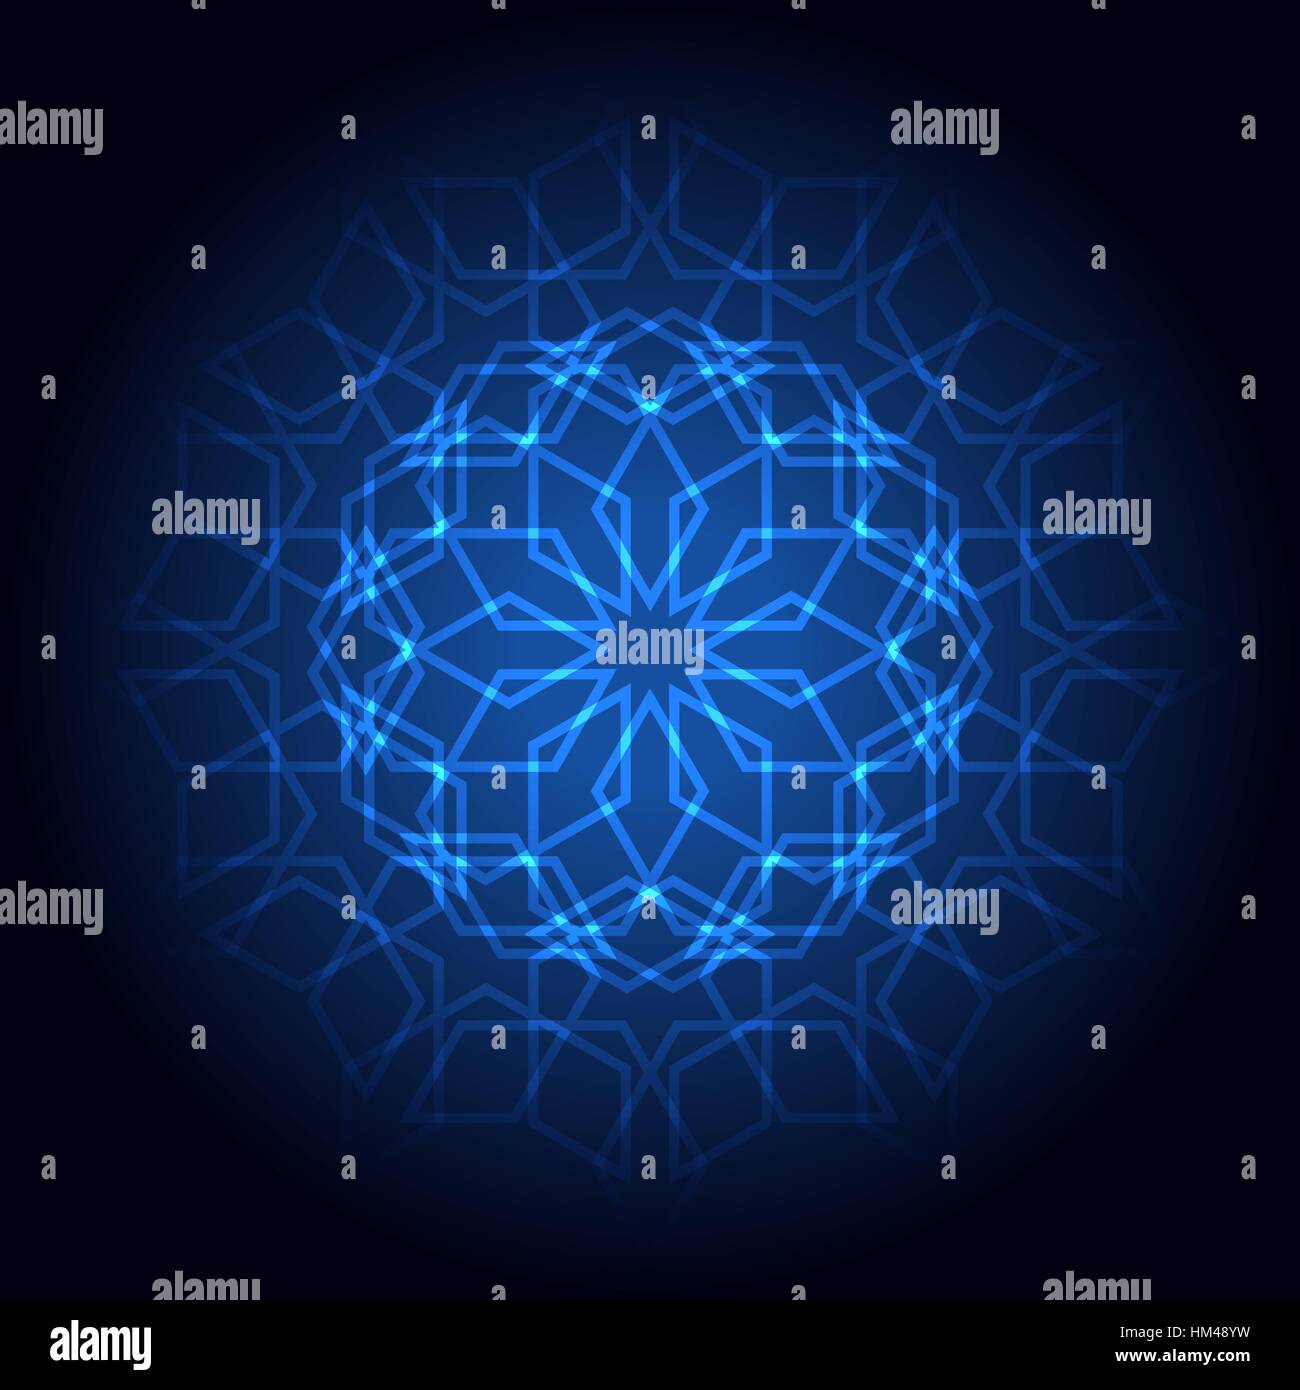 Abstract light background. Vector illustration of glowing laser geometric islamic pattern for your design Stock Vector